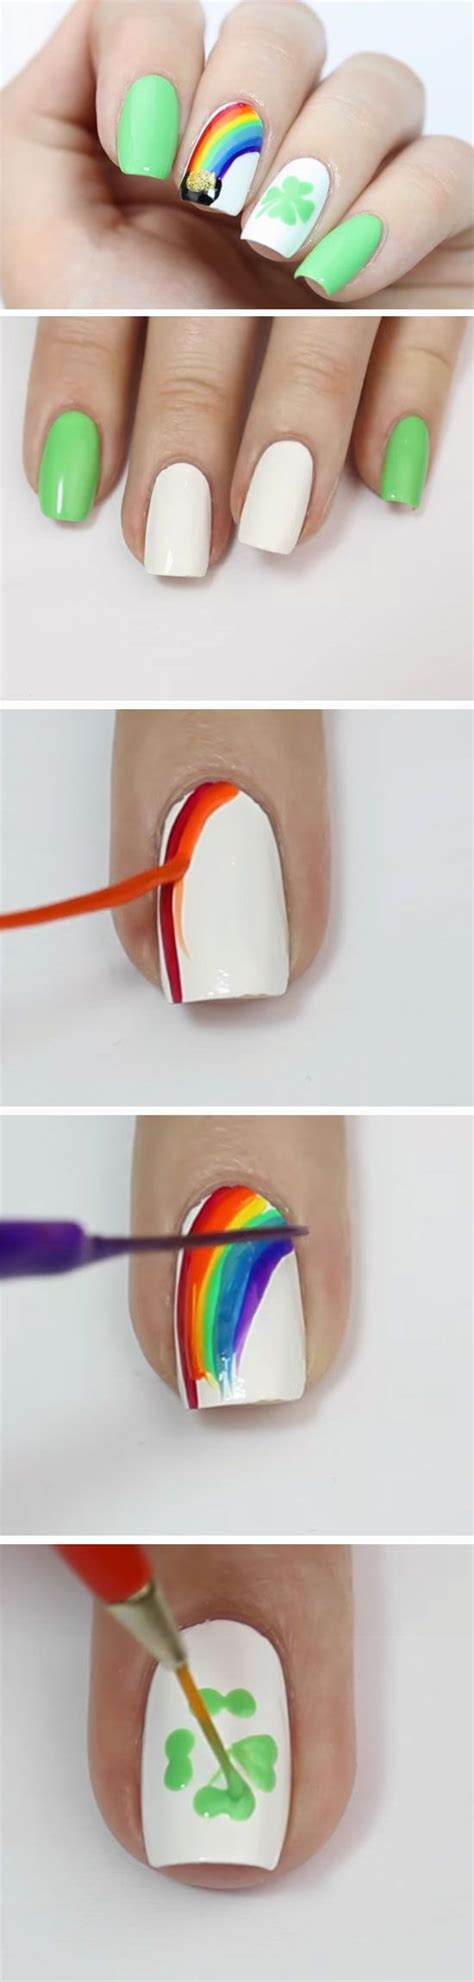 Rainbow reverse french nail design. 19 Easy St Patricks Day Nail Designs | St patricks day ...